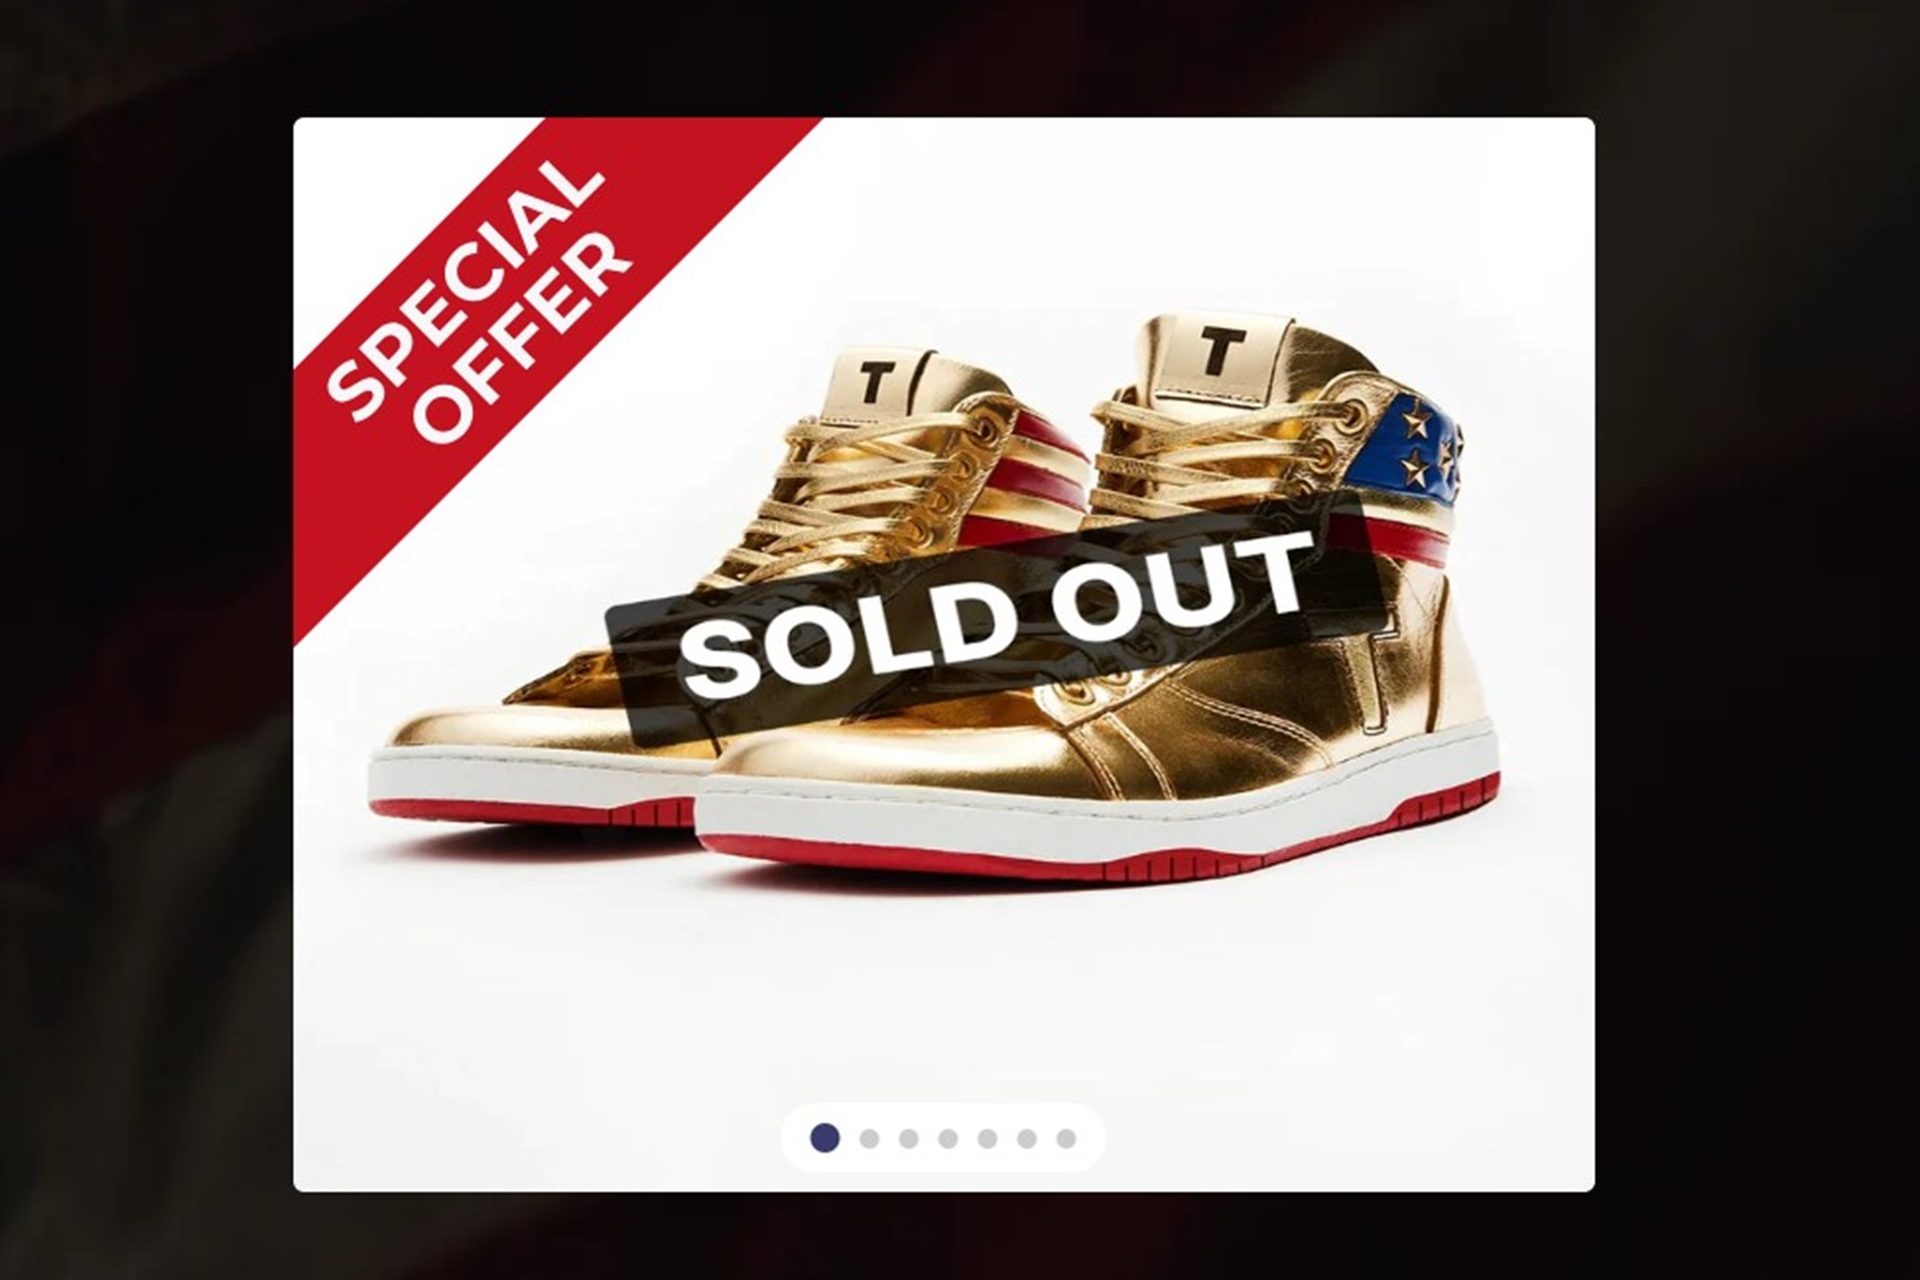 The $400 sneakers sold out immediately